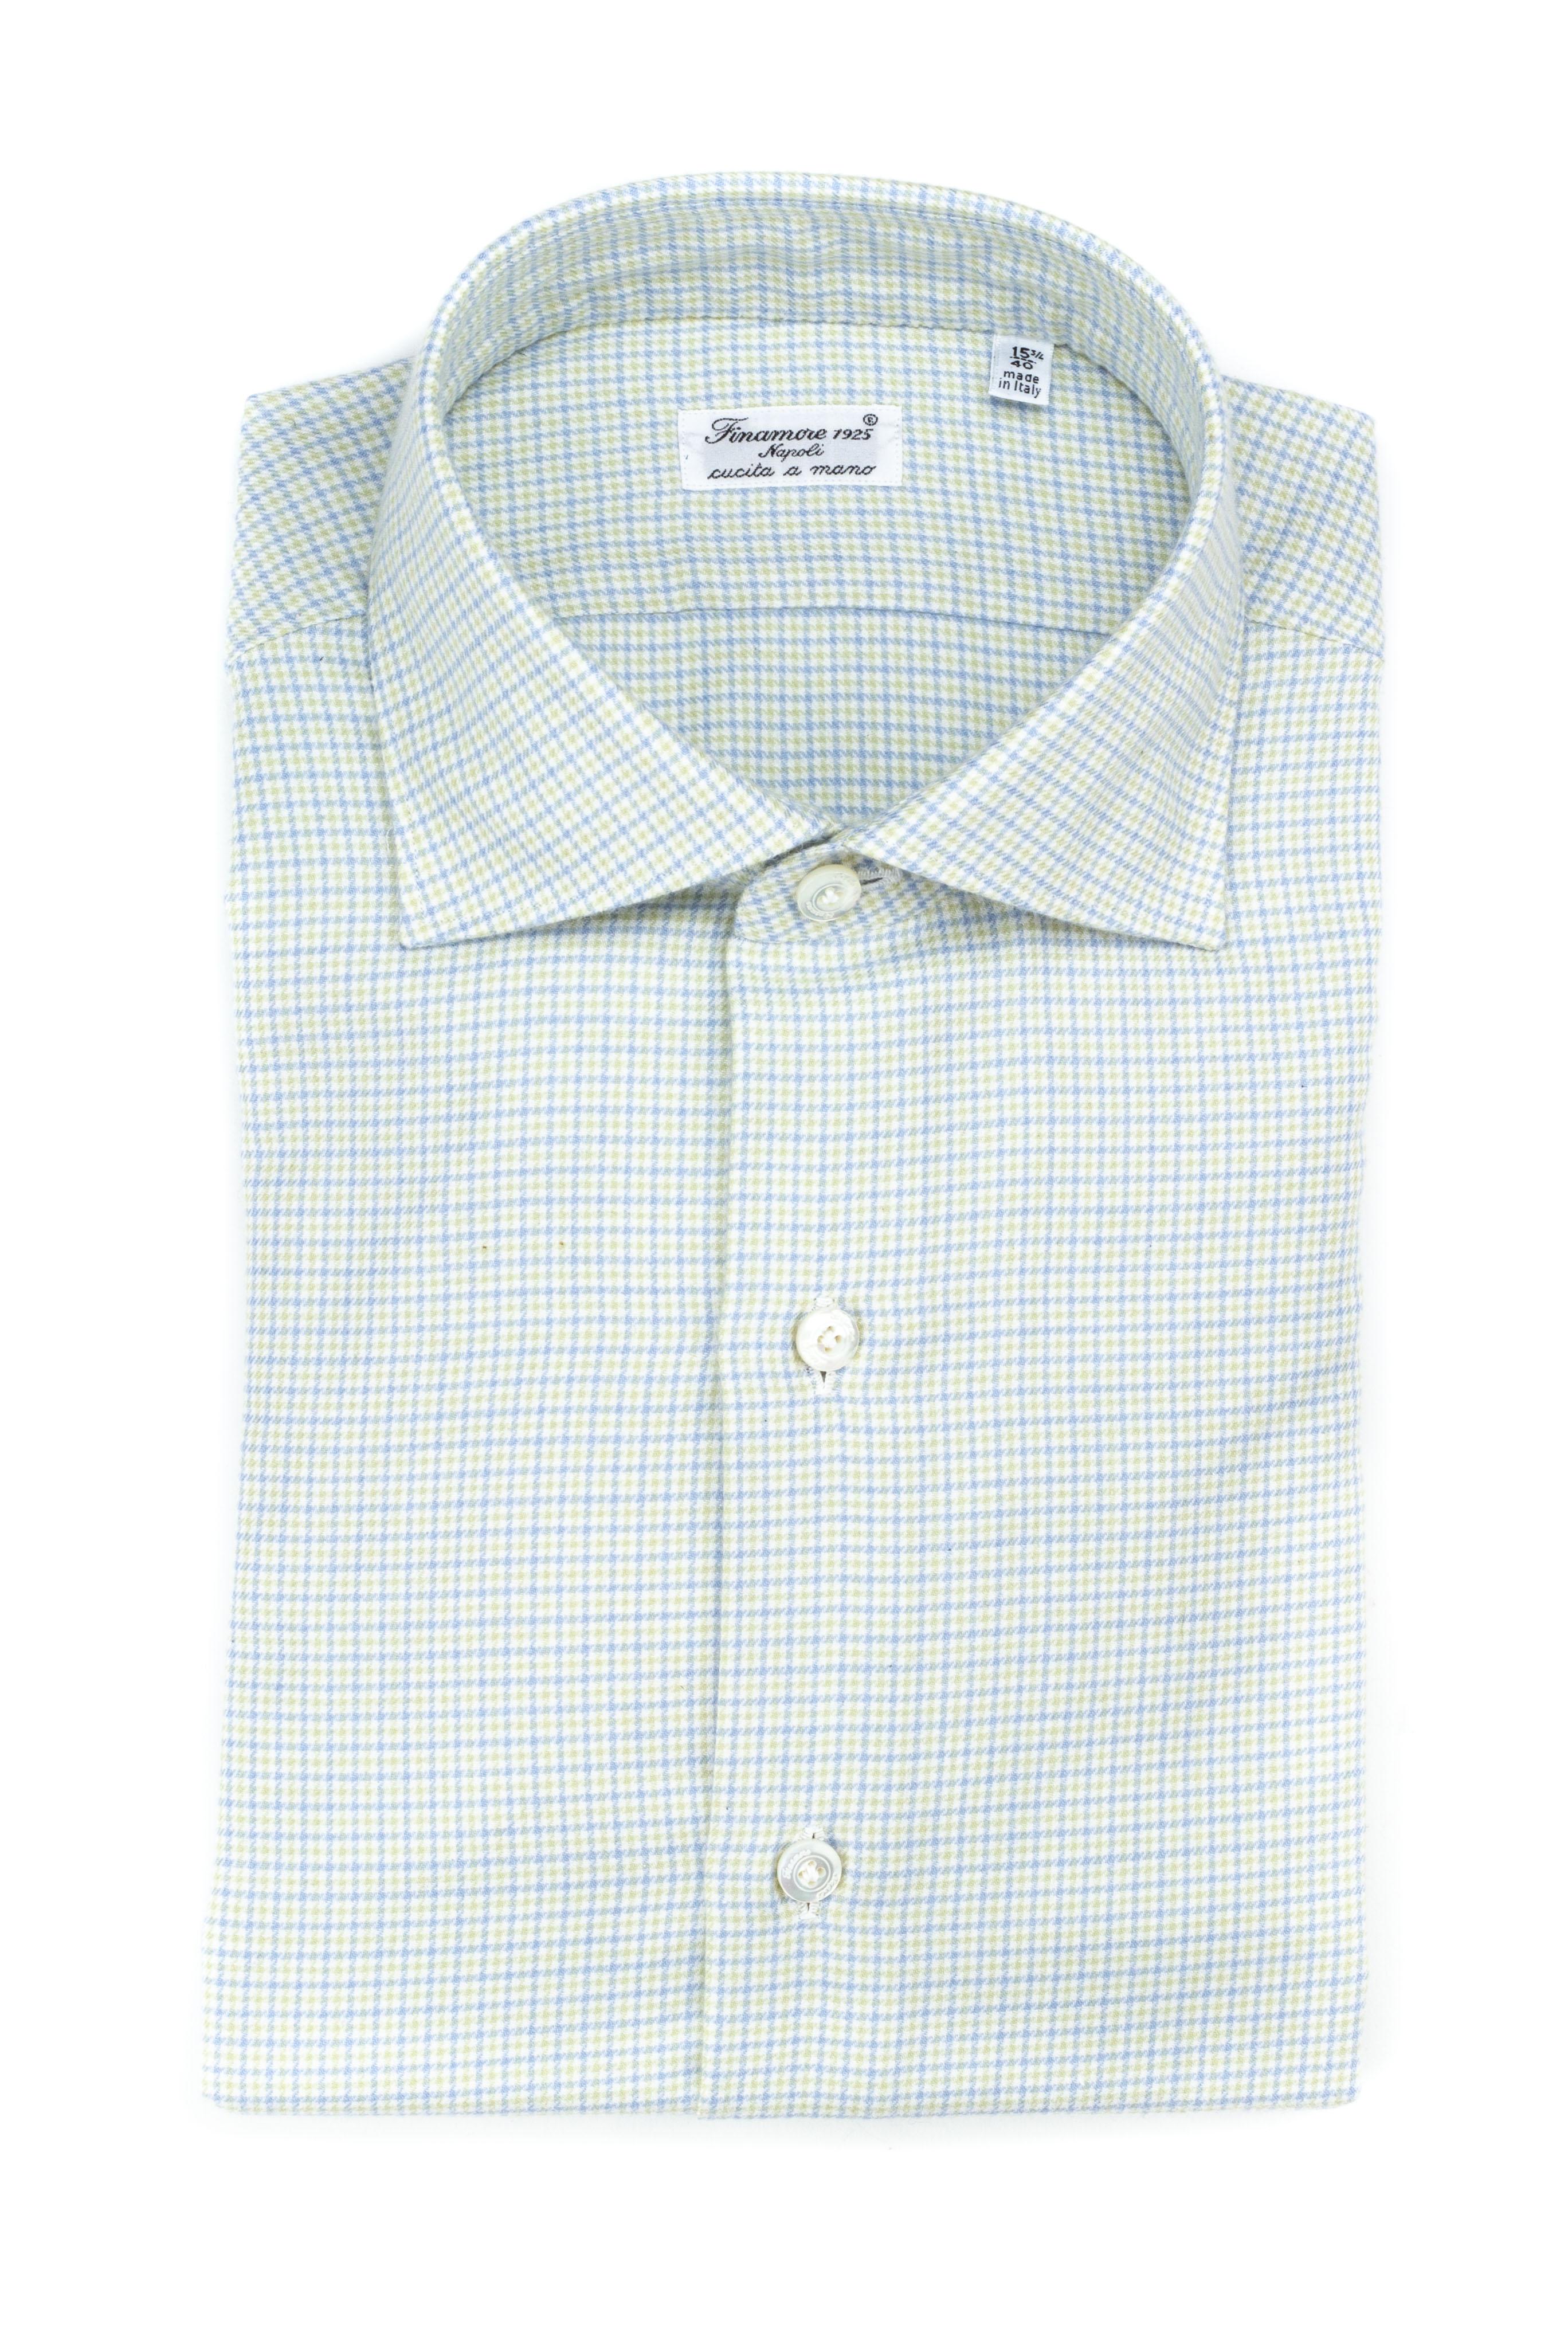 Finamore Micro pattern cotton-cashmere tailored shirt, camicie,  Green/azure, size 39